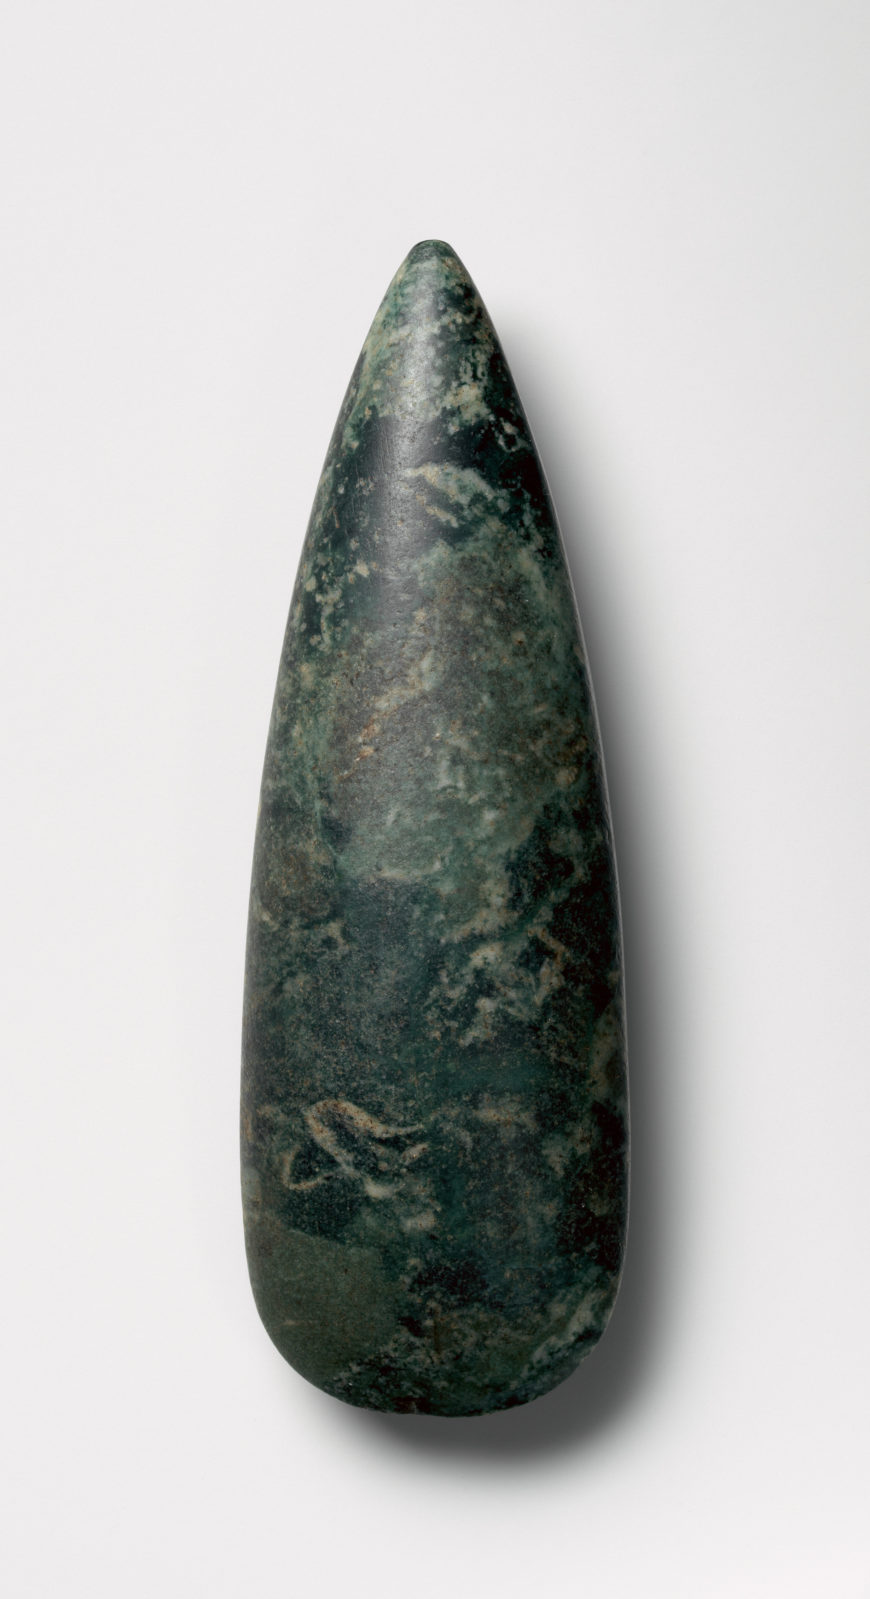 Ceremonial axe blade (celt), 7th-15th century (The Metropolitcan Museum of Art)